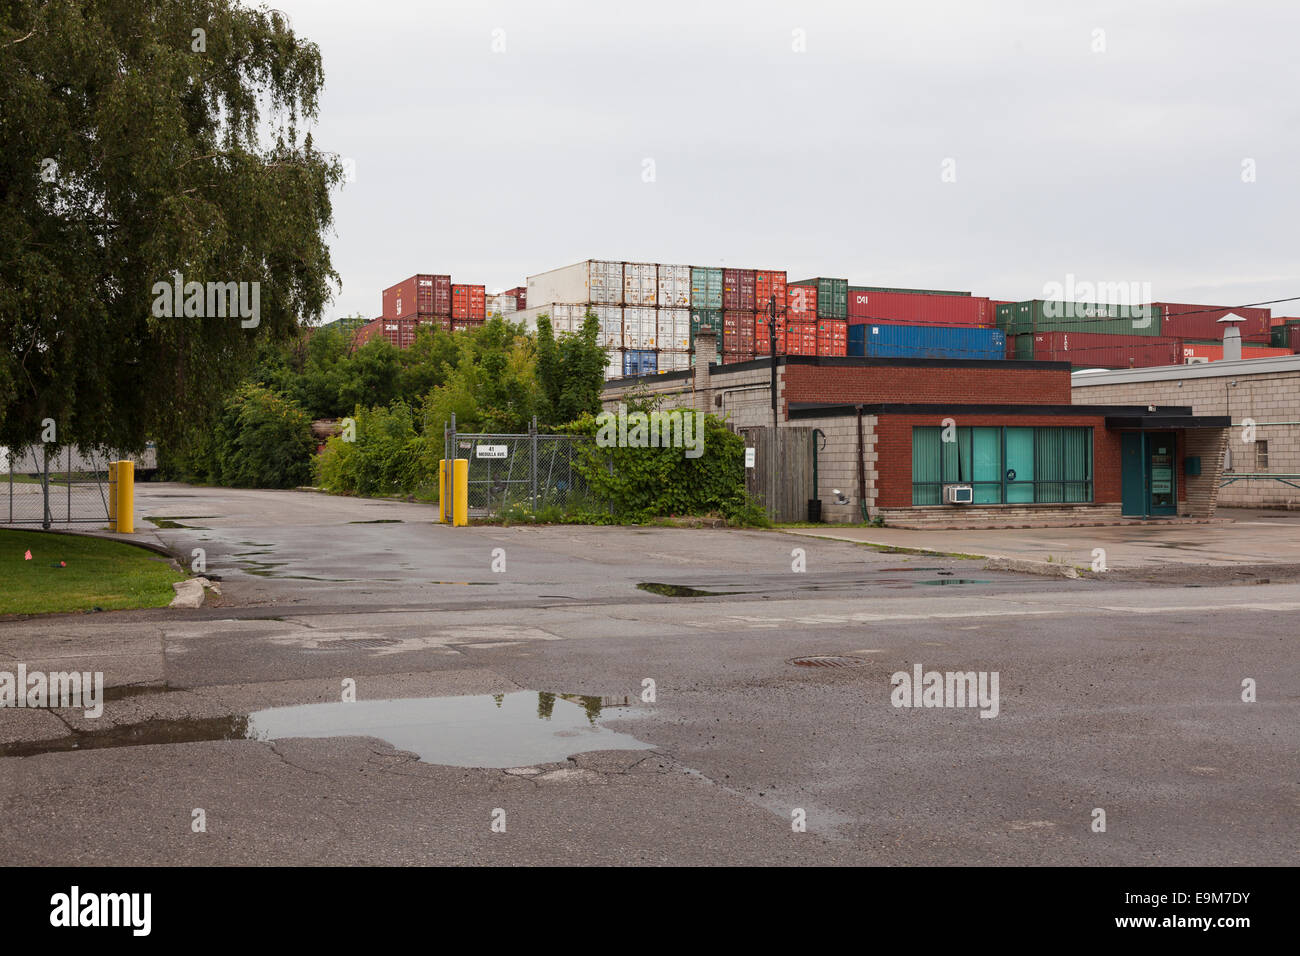 A small industrial building with stacks of shipping containers in the background. Toronto, Ontario, Canada. Stock Photo